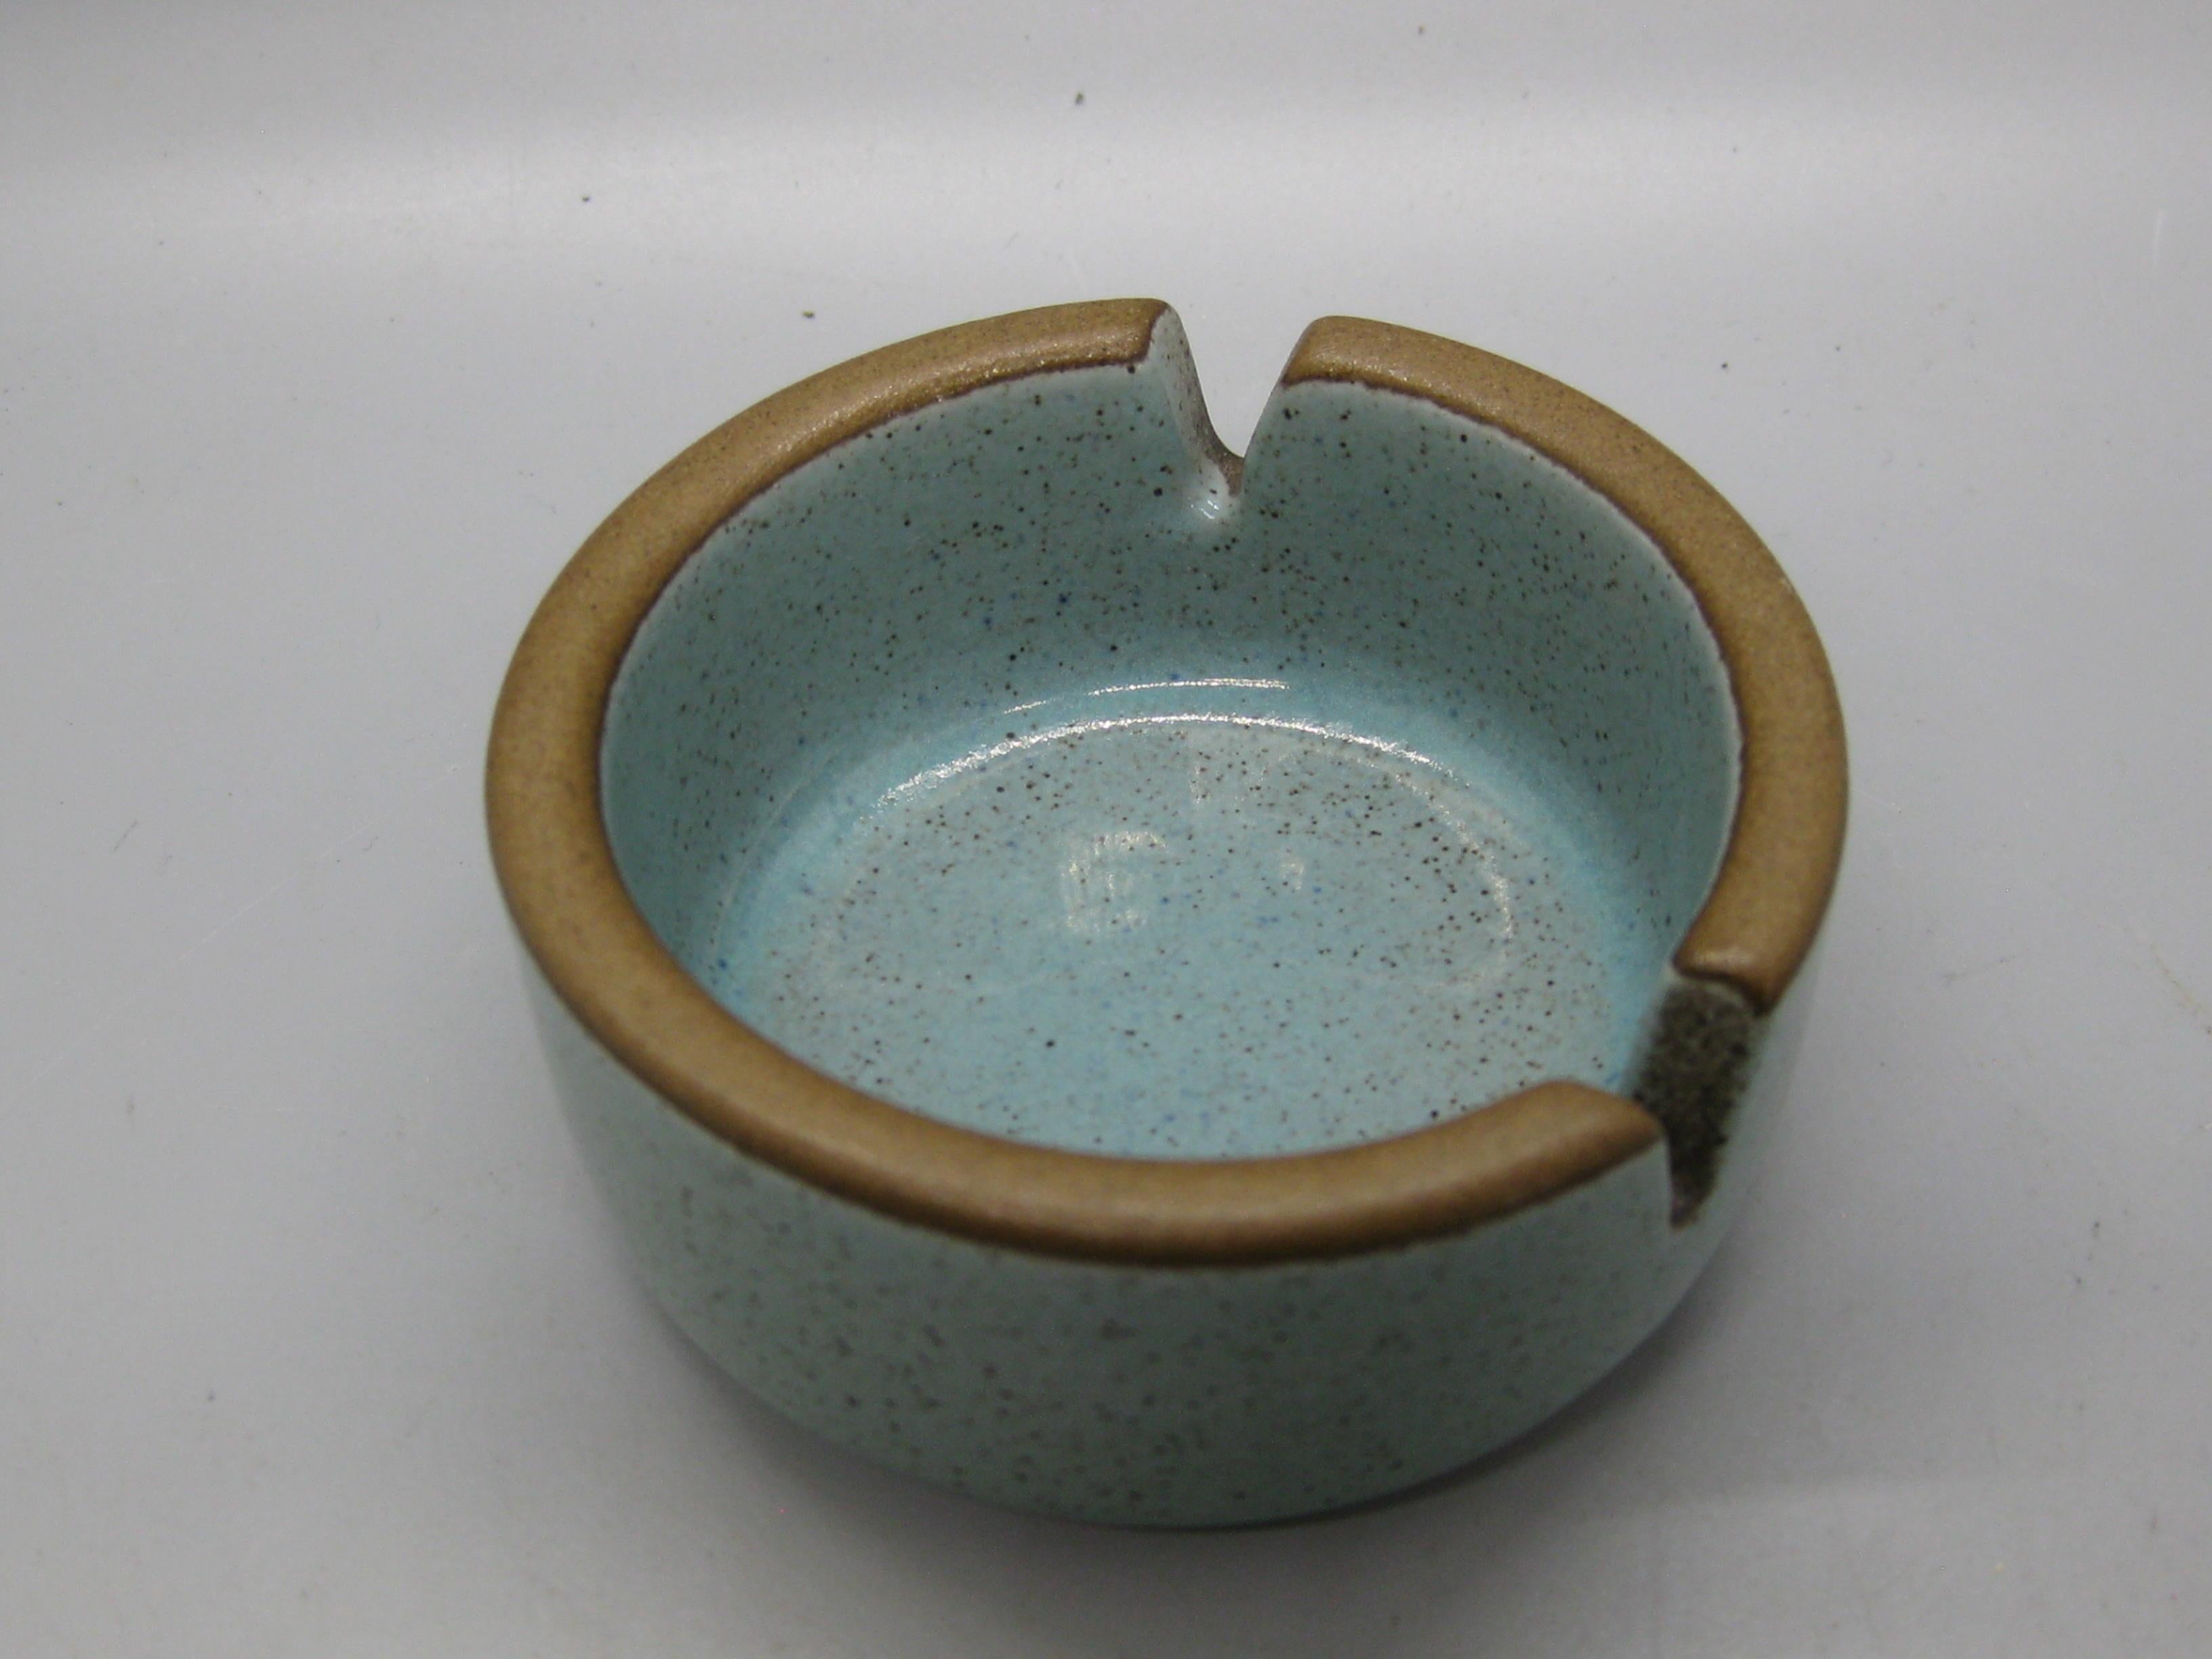 Wonderful Edith Heath ceramic turquoise ashtray. The California pottery piece has a wonderful turquoise color and two places for cigarettes. Signed on the bottom. In excellent shape and appears it has never been used. No chips, no nicks and no